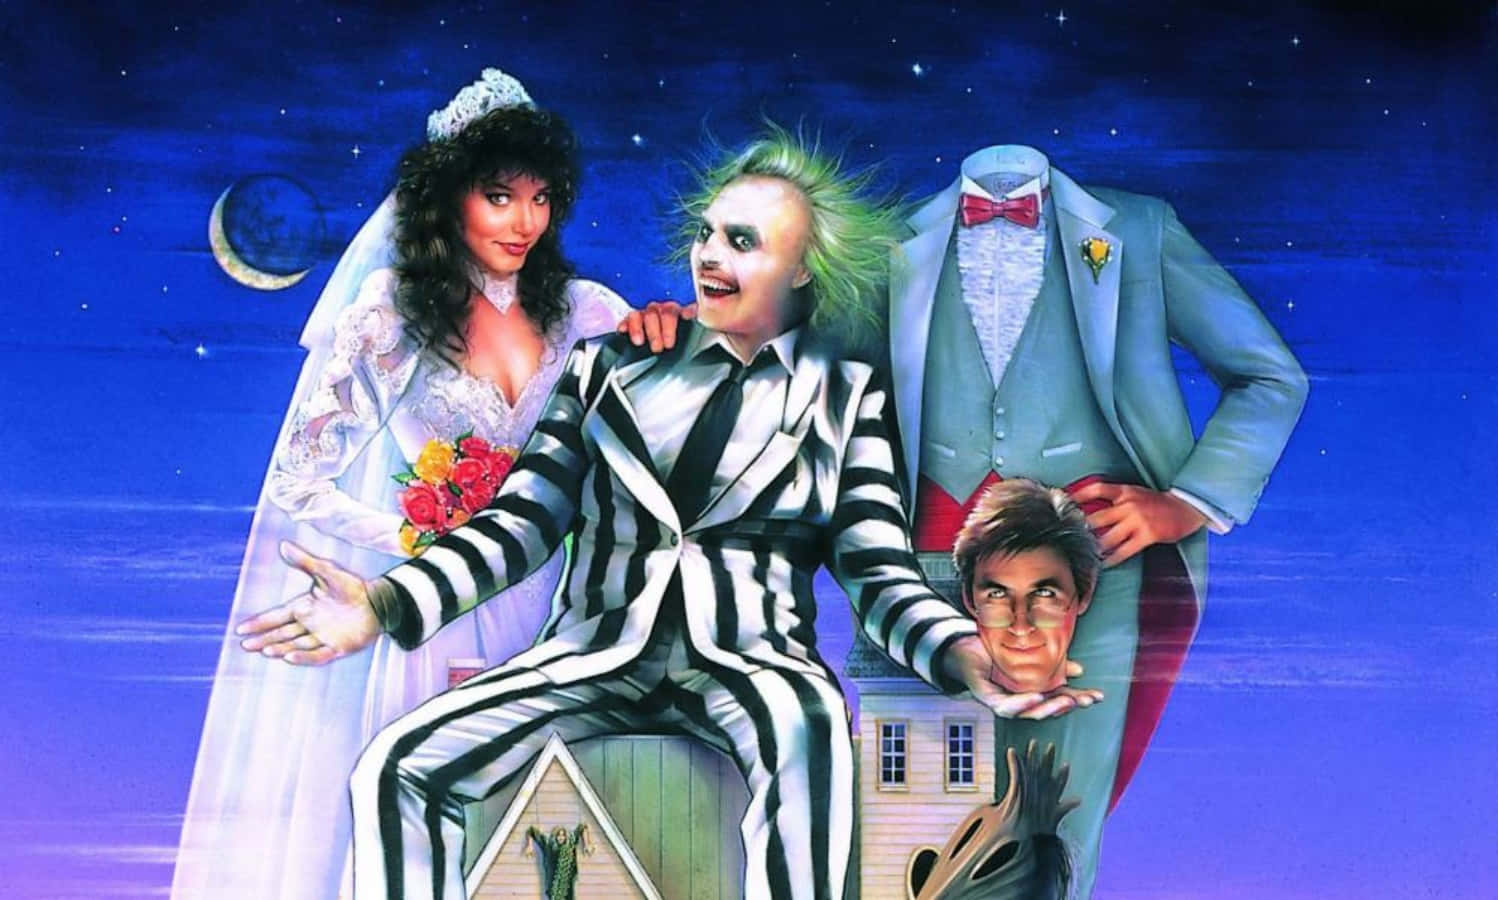 Beetlejuice in his iconic striped suit, holding a shrunken head.